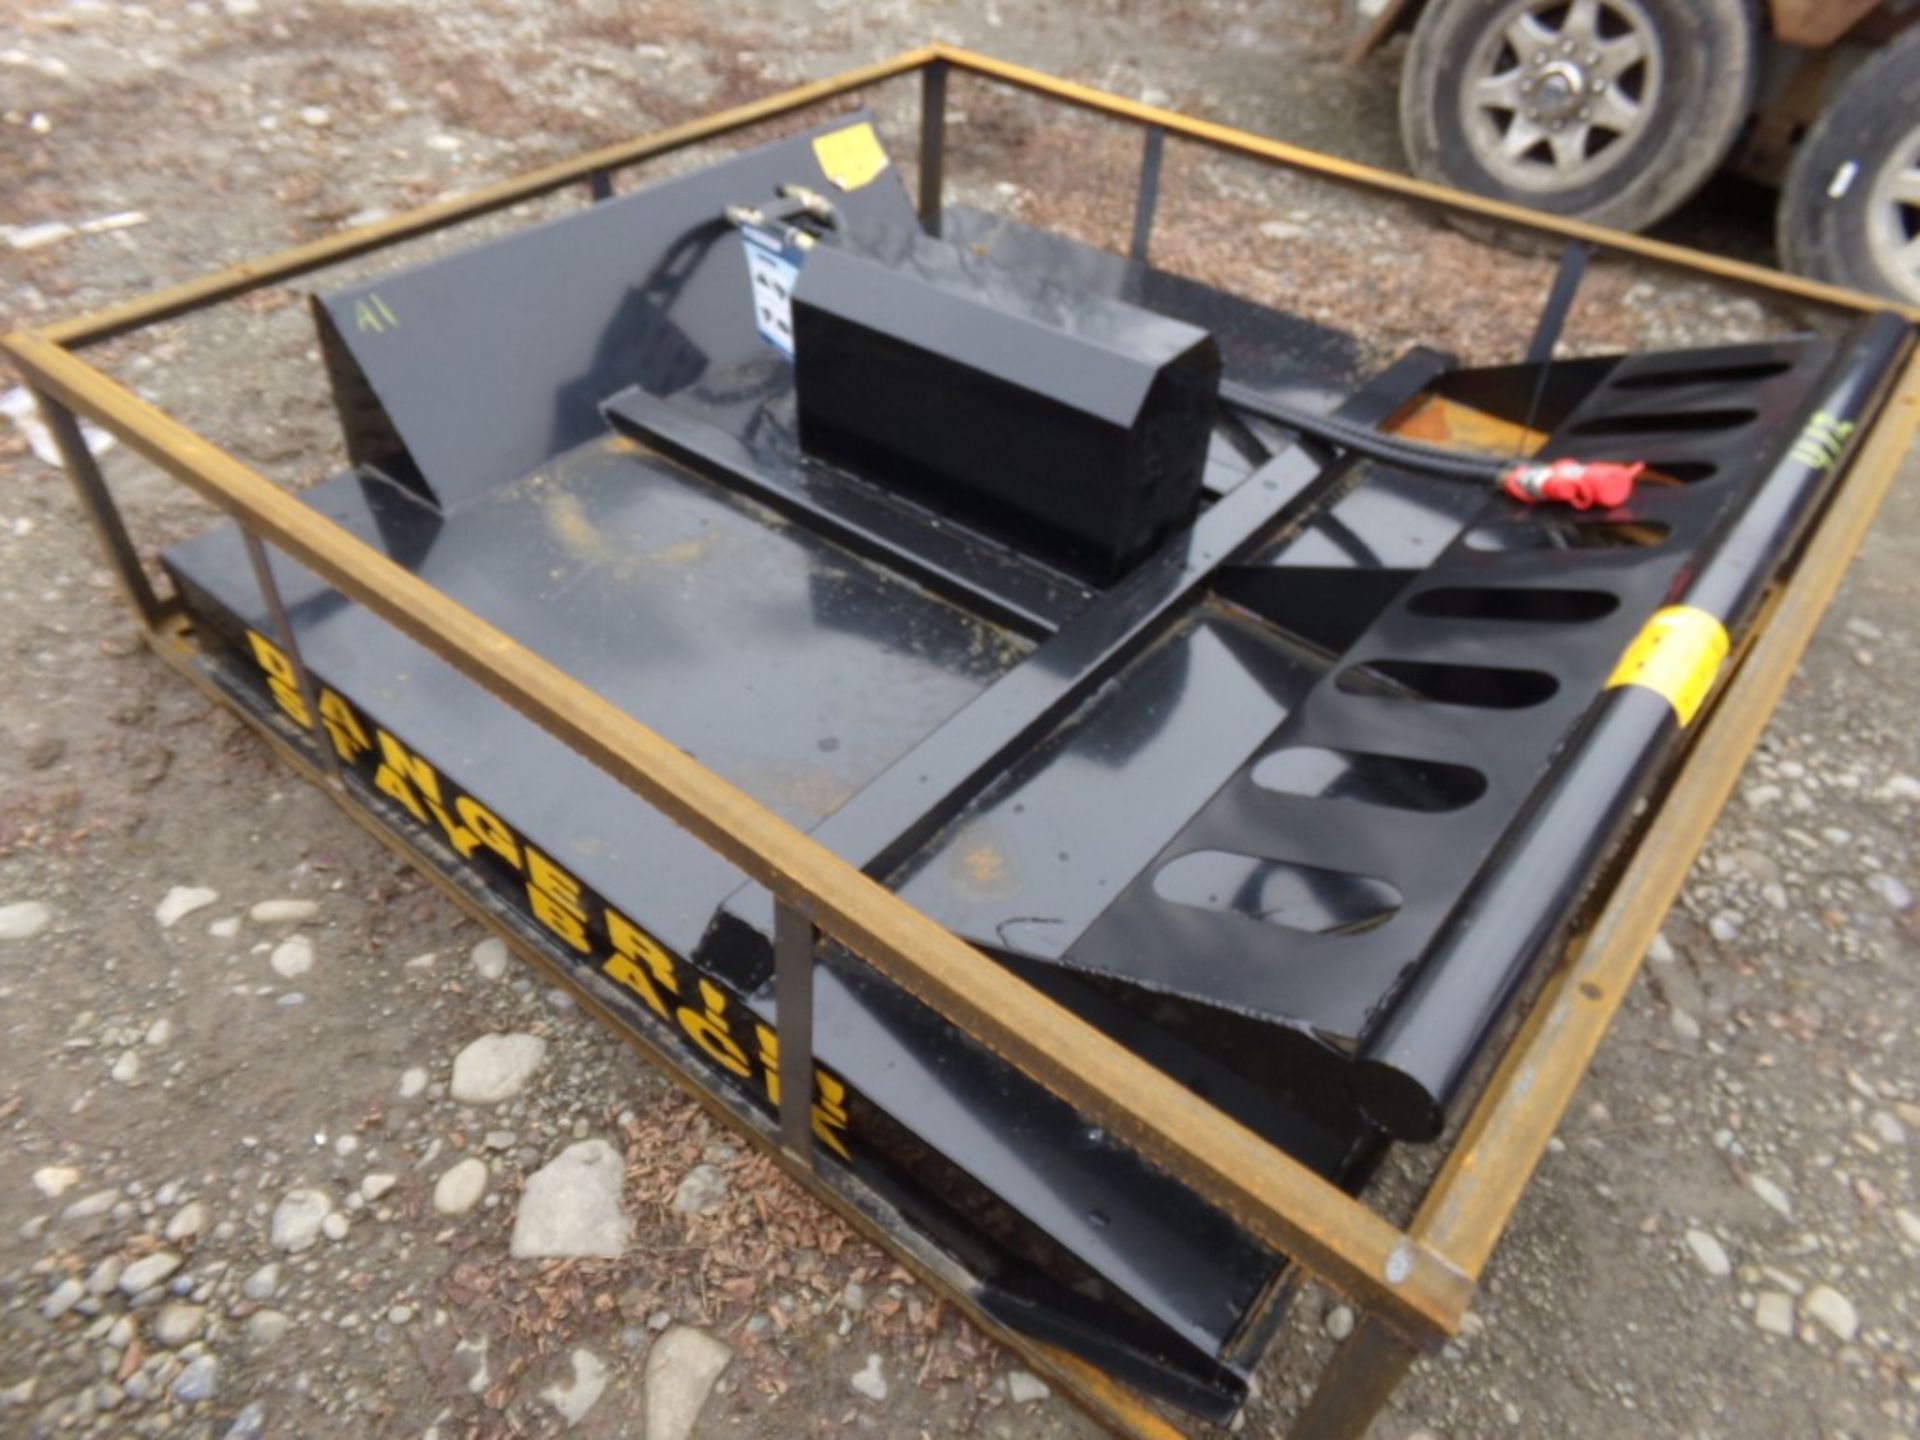 New, 72'' Skid Steer Brush Cutter, Check Gear Box Oil Before Use - Image 2 of 2